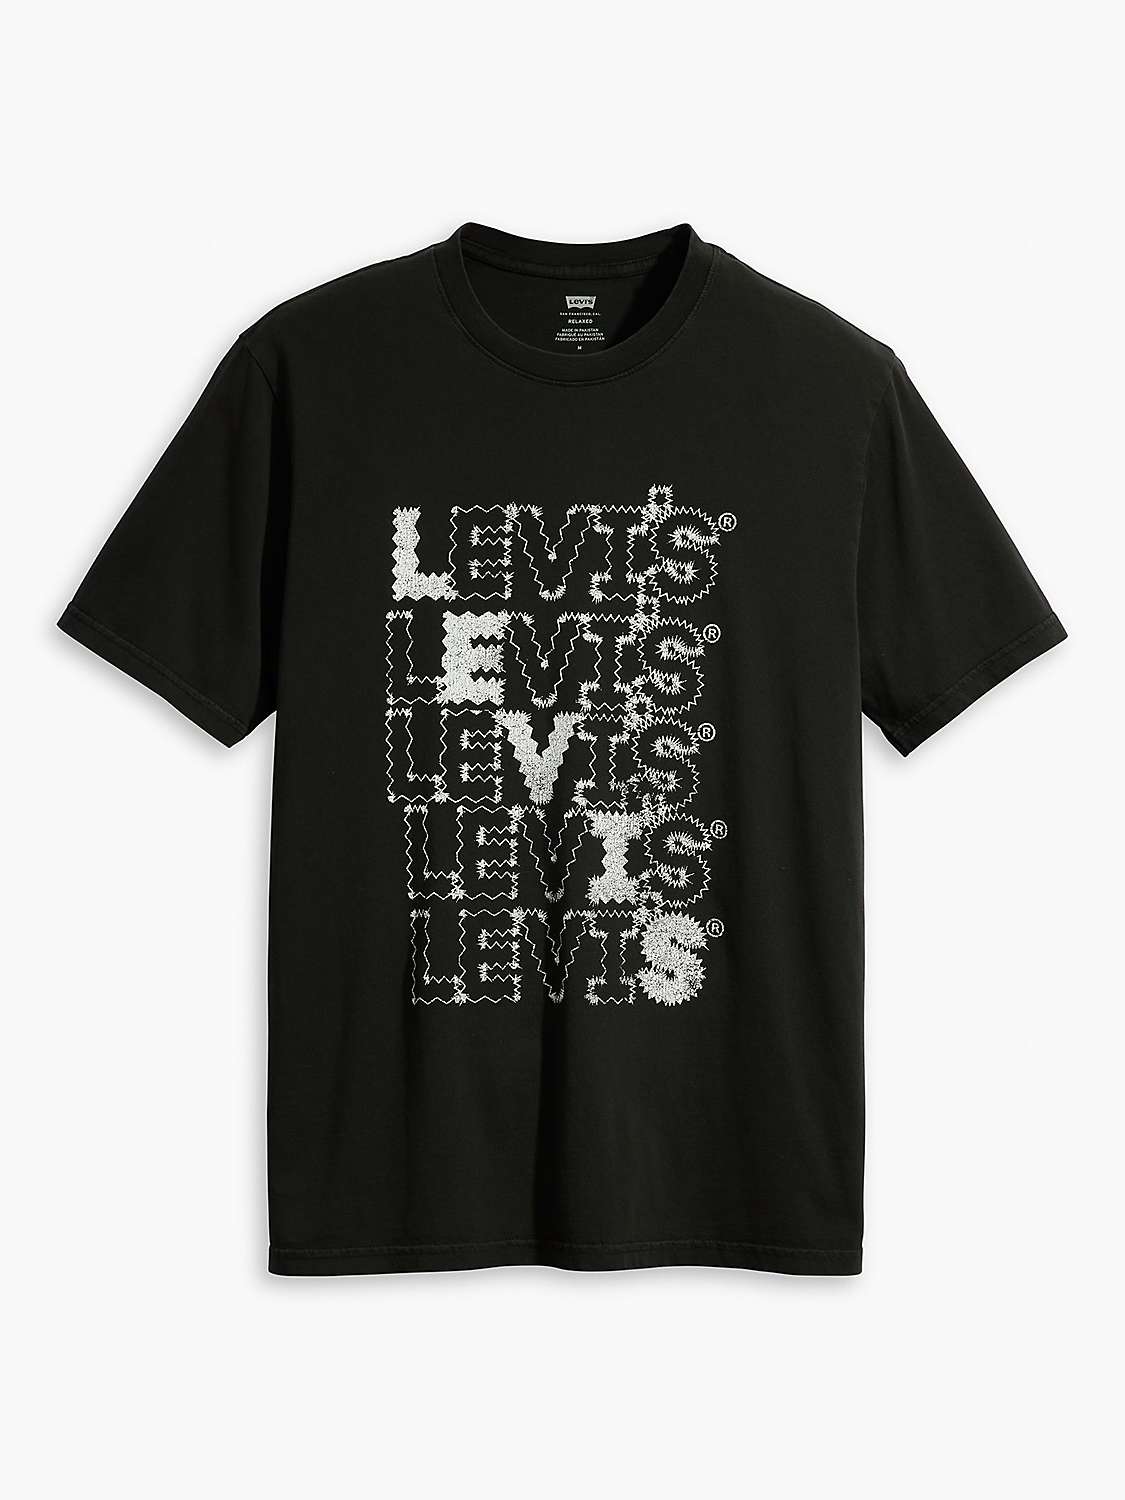 Buy Levi's Short Sleeve Relaxed Fit T-Shirt, Black/Multi Online at johnlewis.com